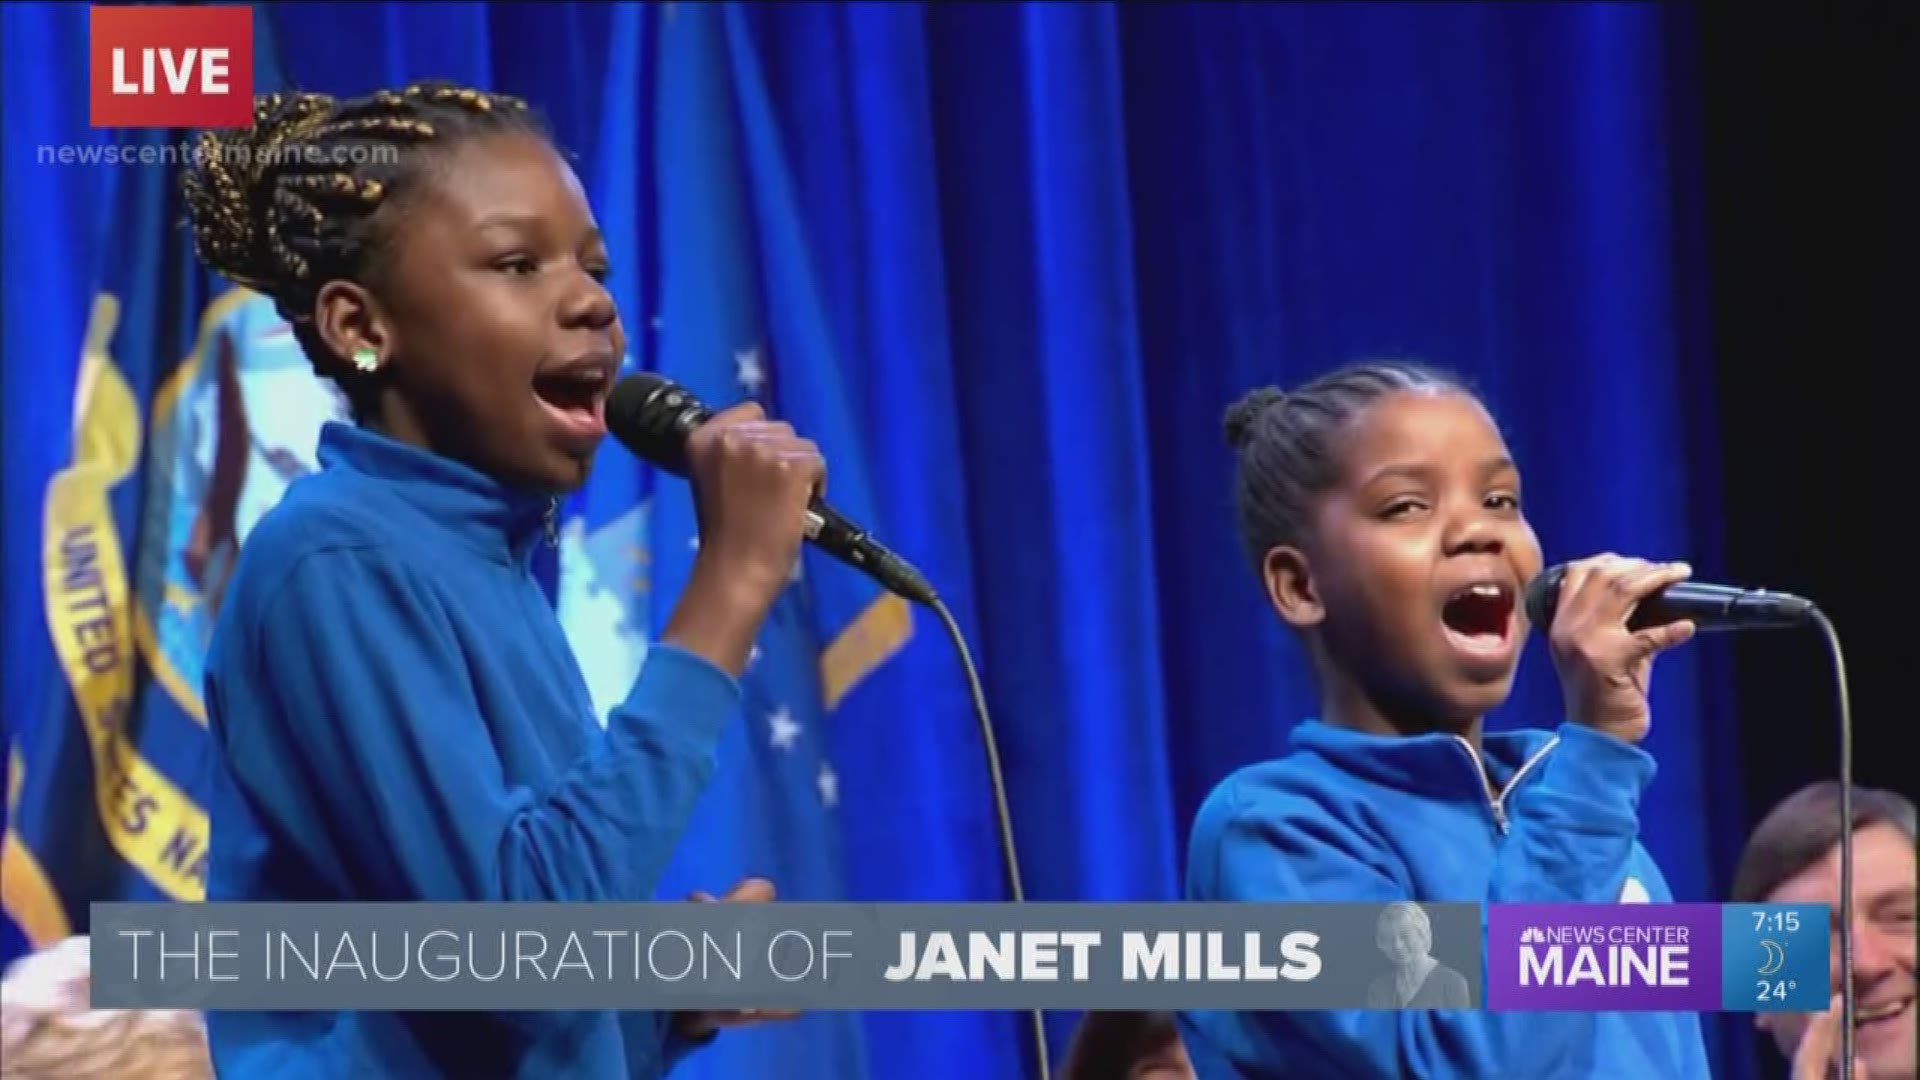 Shy and Natalia perform Alicia Keys' 'Girl on Fire' at Mills inauguration